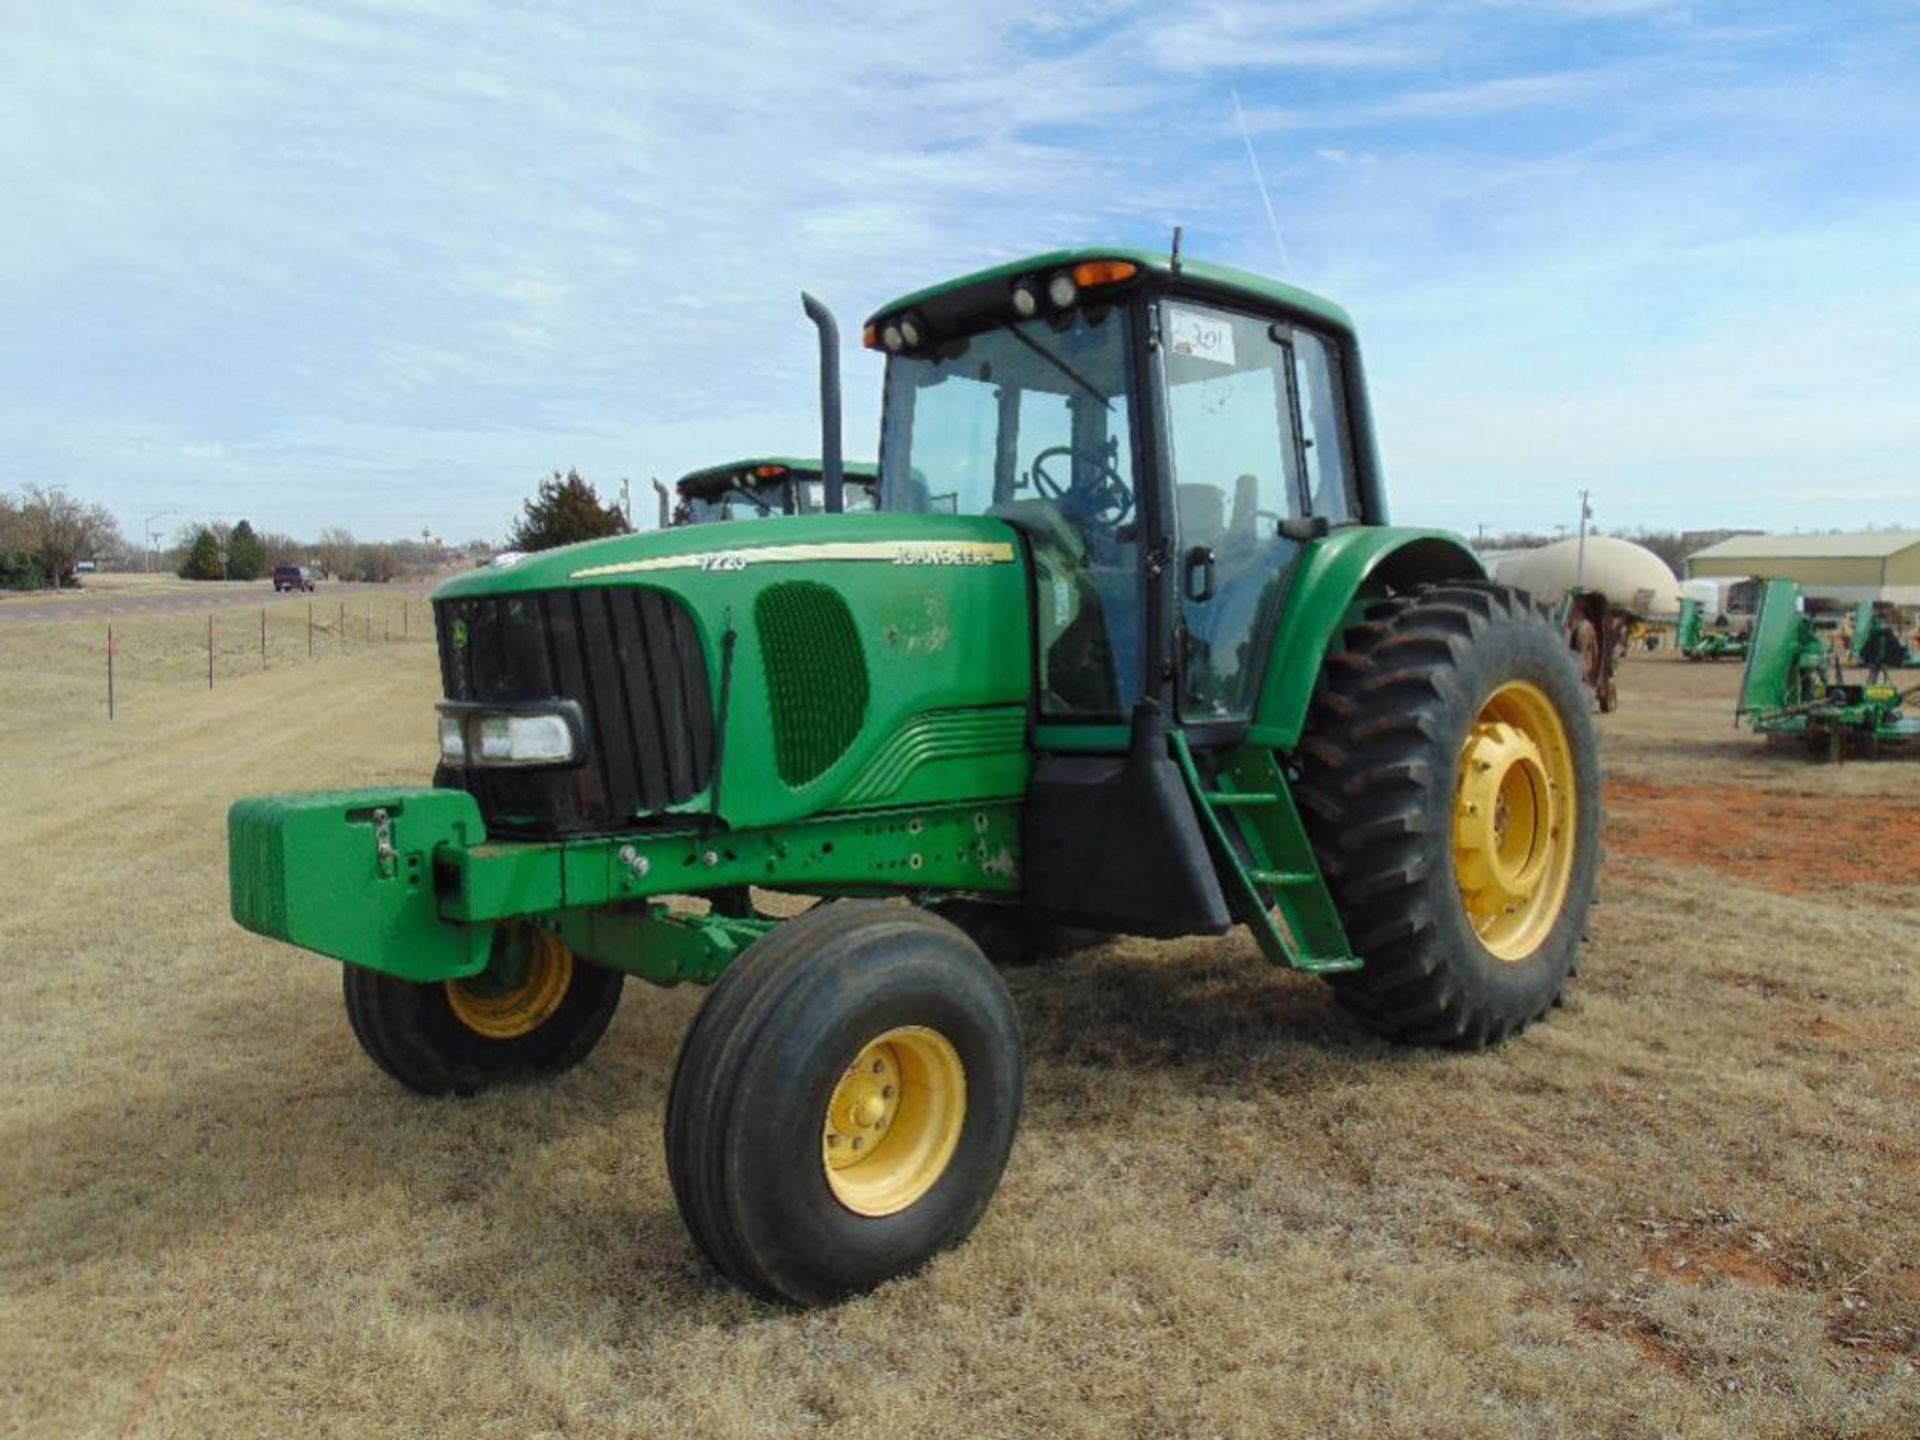 2005 John Deere 7220 Farm Tractor s/n 034661 Cab, a/c, 3pt, pto,hyd outlets, 4732 hrs - Image 2 of 7